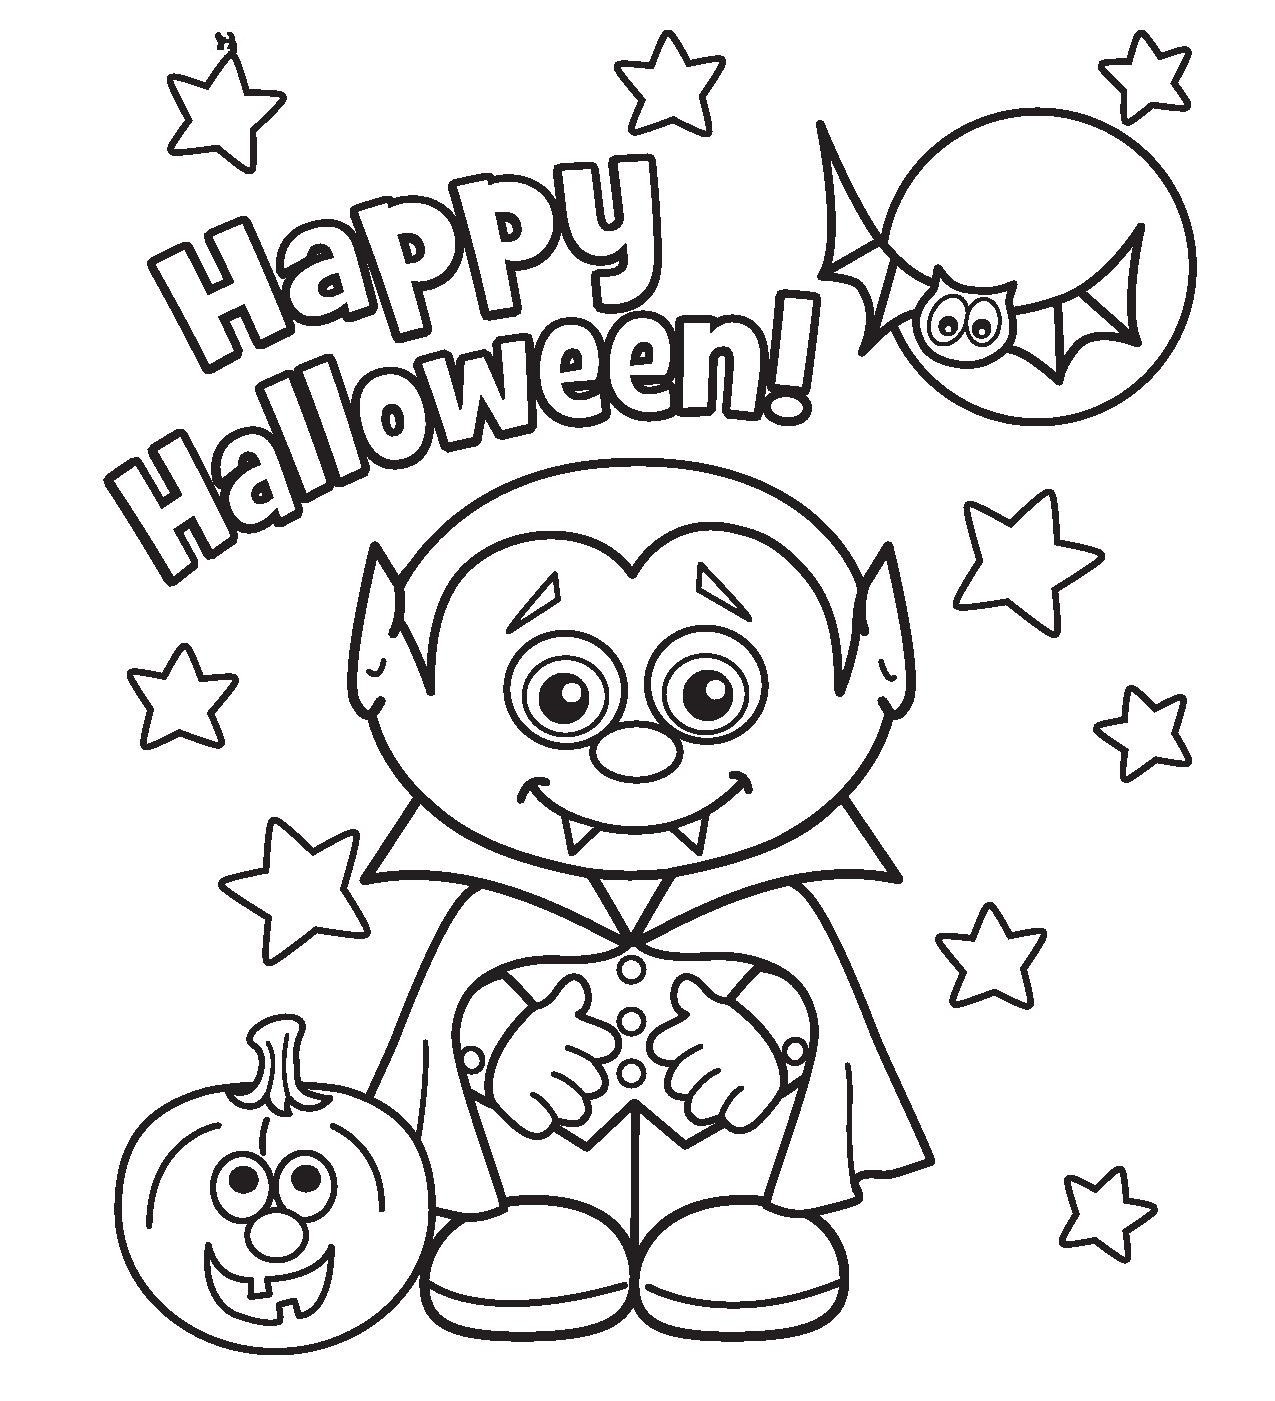 Download Halloween Coloring Pages to Honor the Spirit of This Scary ...